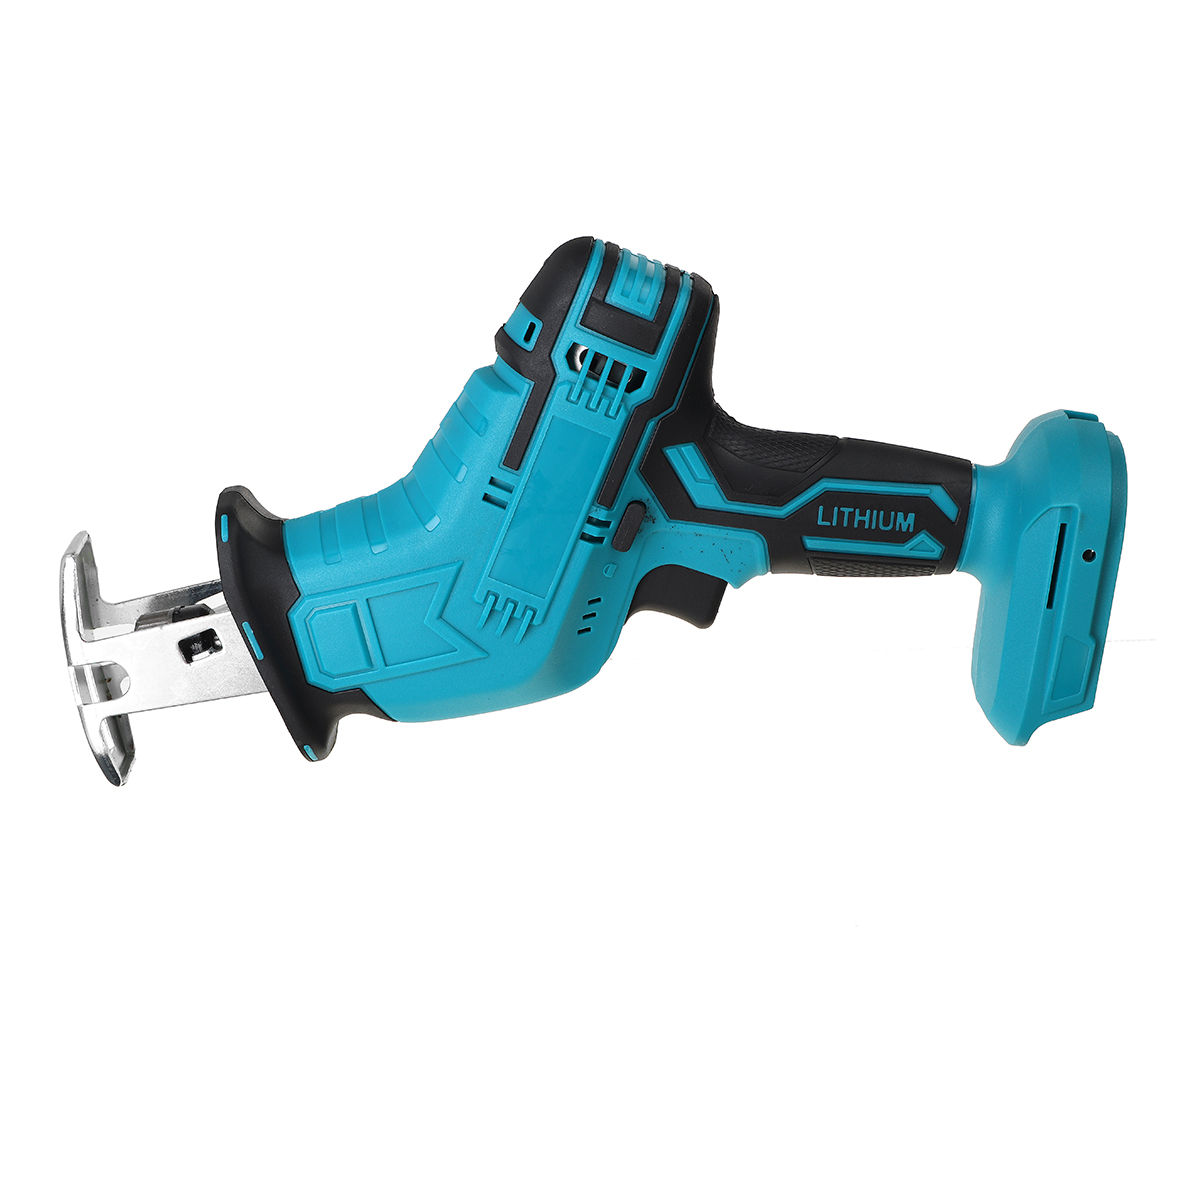 Cordless-Reciprocating-Saw-Portable-Electric-Saw-Wood-Cutting-Tool-For-Makita-18V-Battery-1786908-7